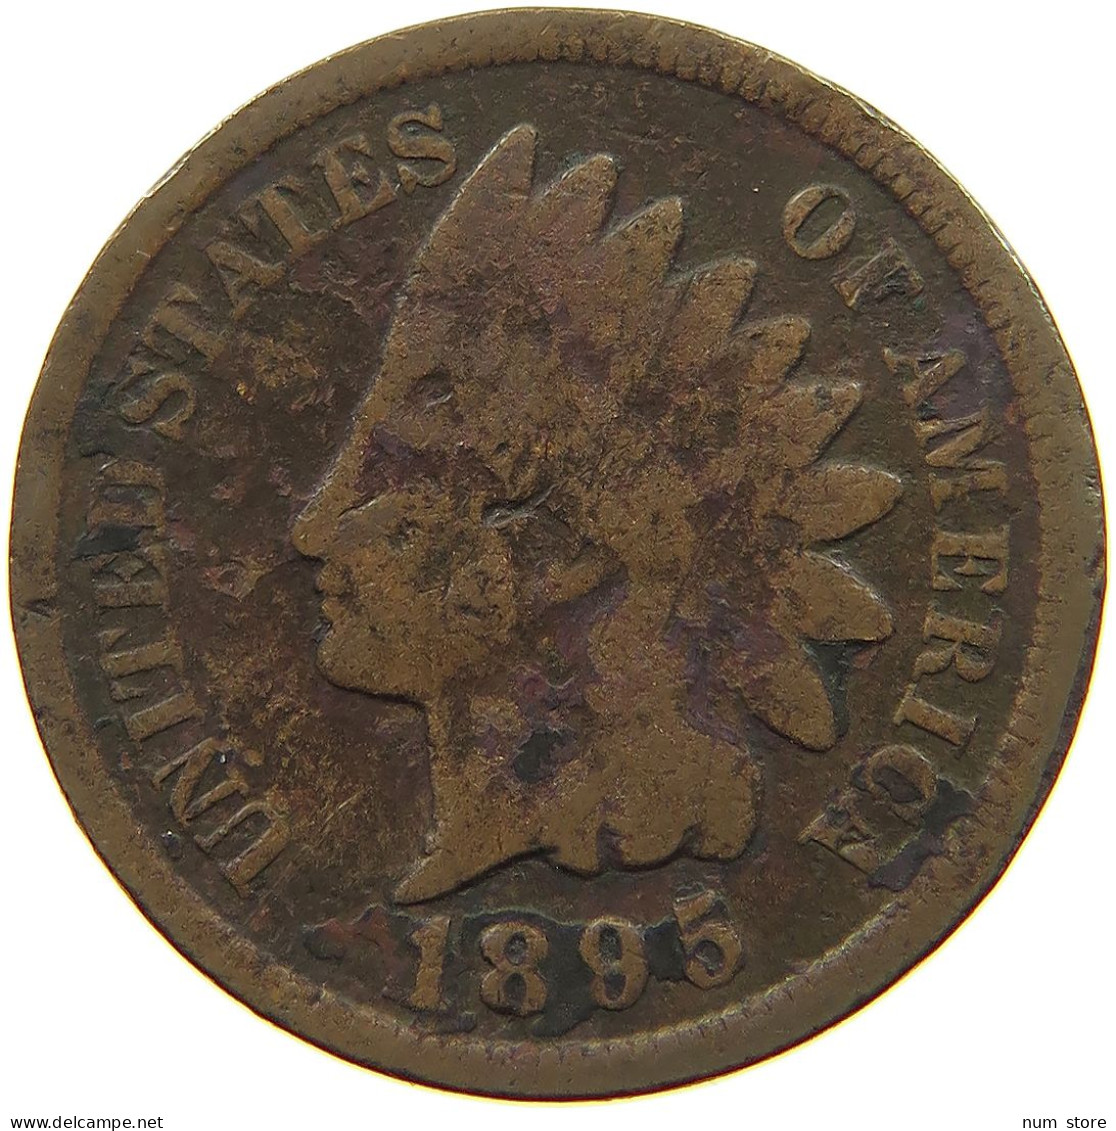 UNITED STATES OF AMERICA CENT 1895 INDIAN HEAD #s063 0195 - 1859-1909: Indian Head